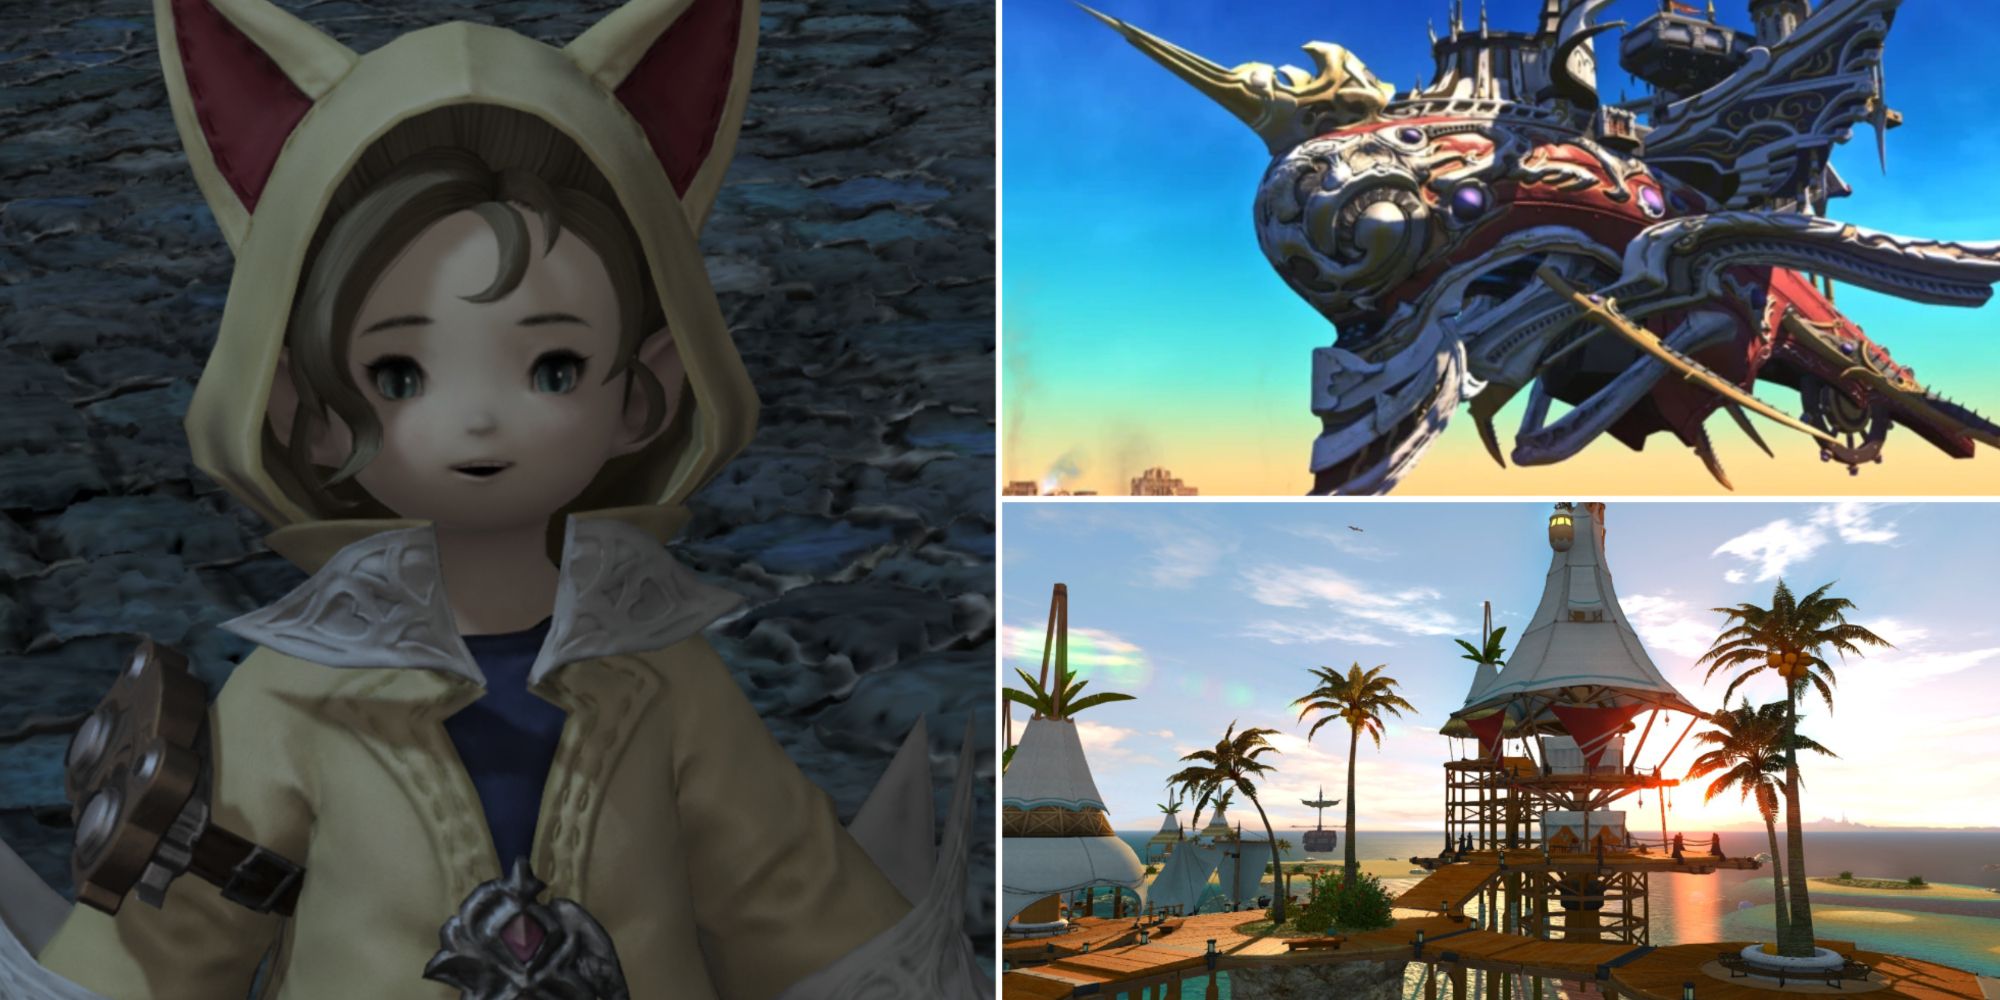 The left image showcases Krile from Final Fantasy 14, a Lalafell with a yellow coat that has pointed ears. The top image is the Prima Vista Airship, which has a red, white, gold, and blue color scheme and sharp edges. The bottom right image is a shot of the Costa del Sol beach in the game, showing the palm trees, wooden walkways and condos that overlook the shoreline. 